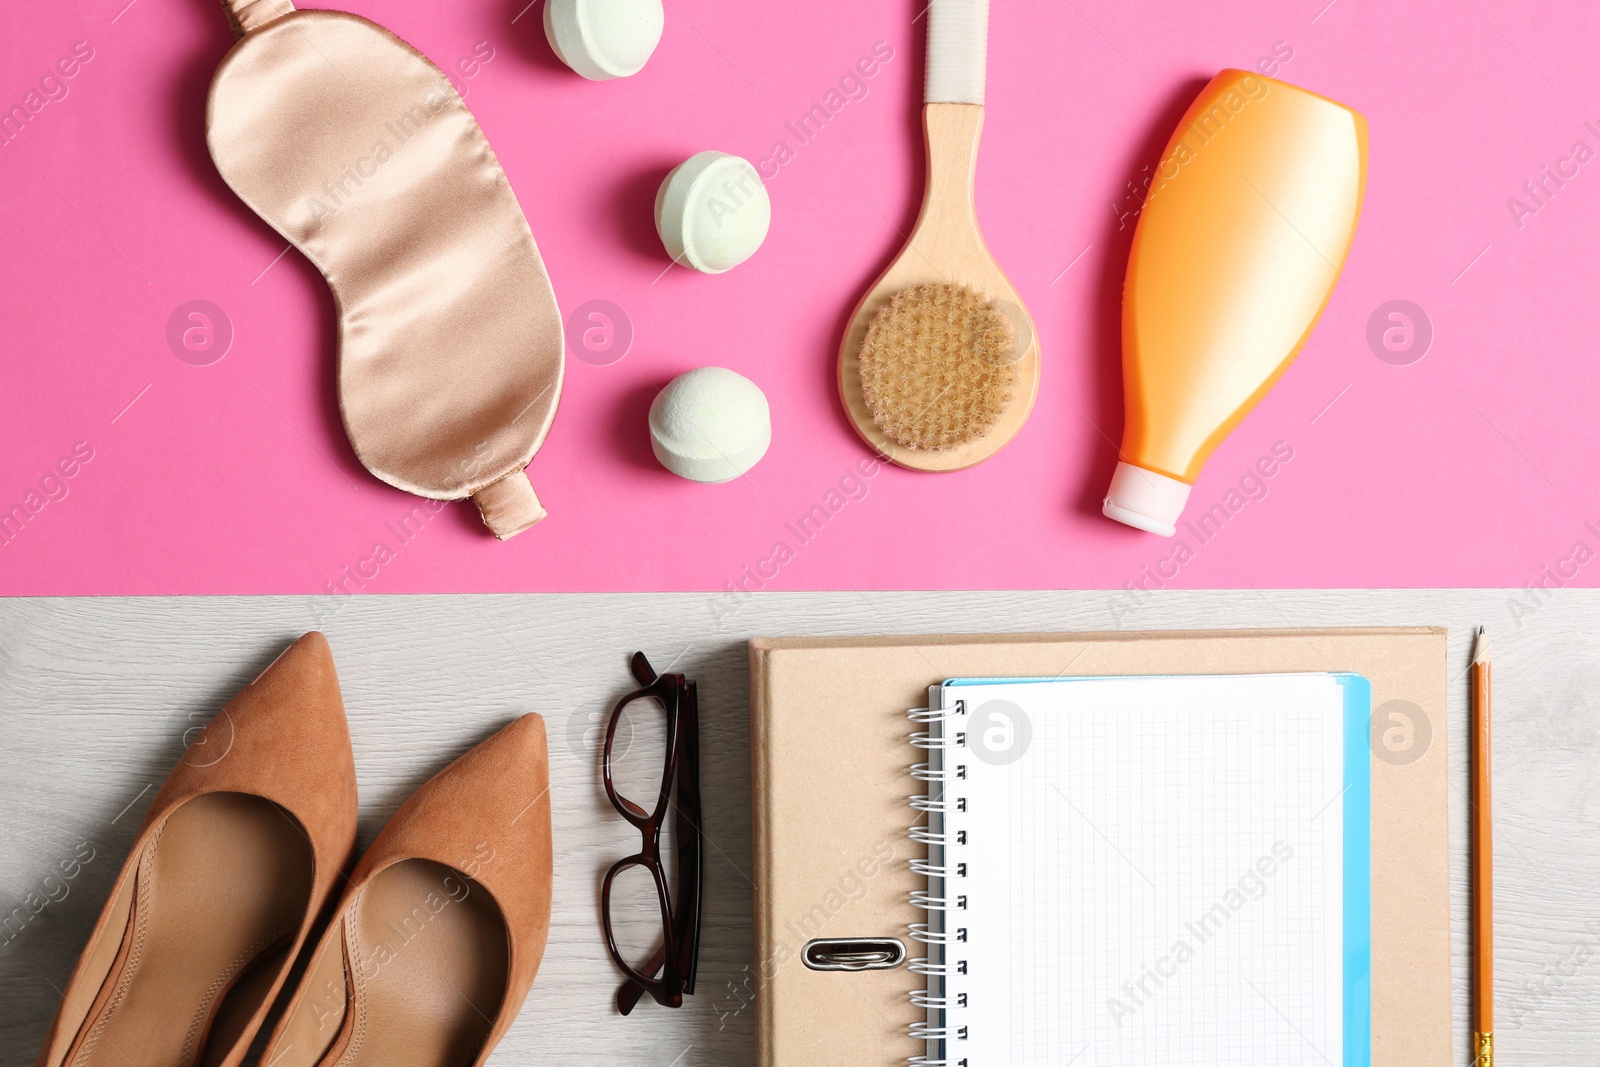 Photo of Flat lay composition with business items and bathroom accessories on color background. Concept of balance between work and life